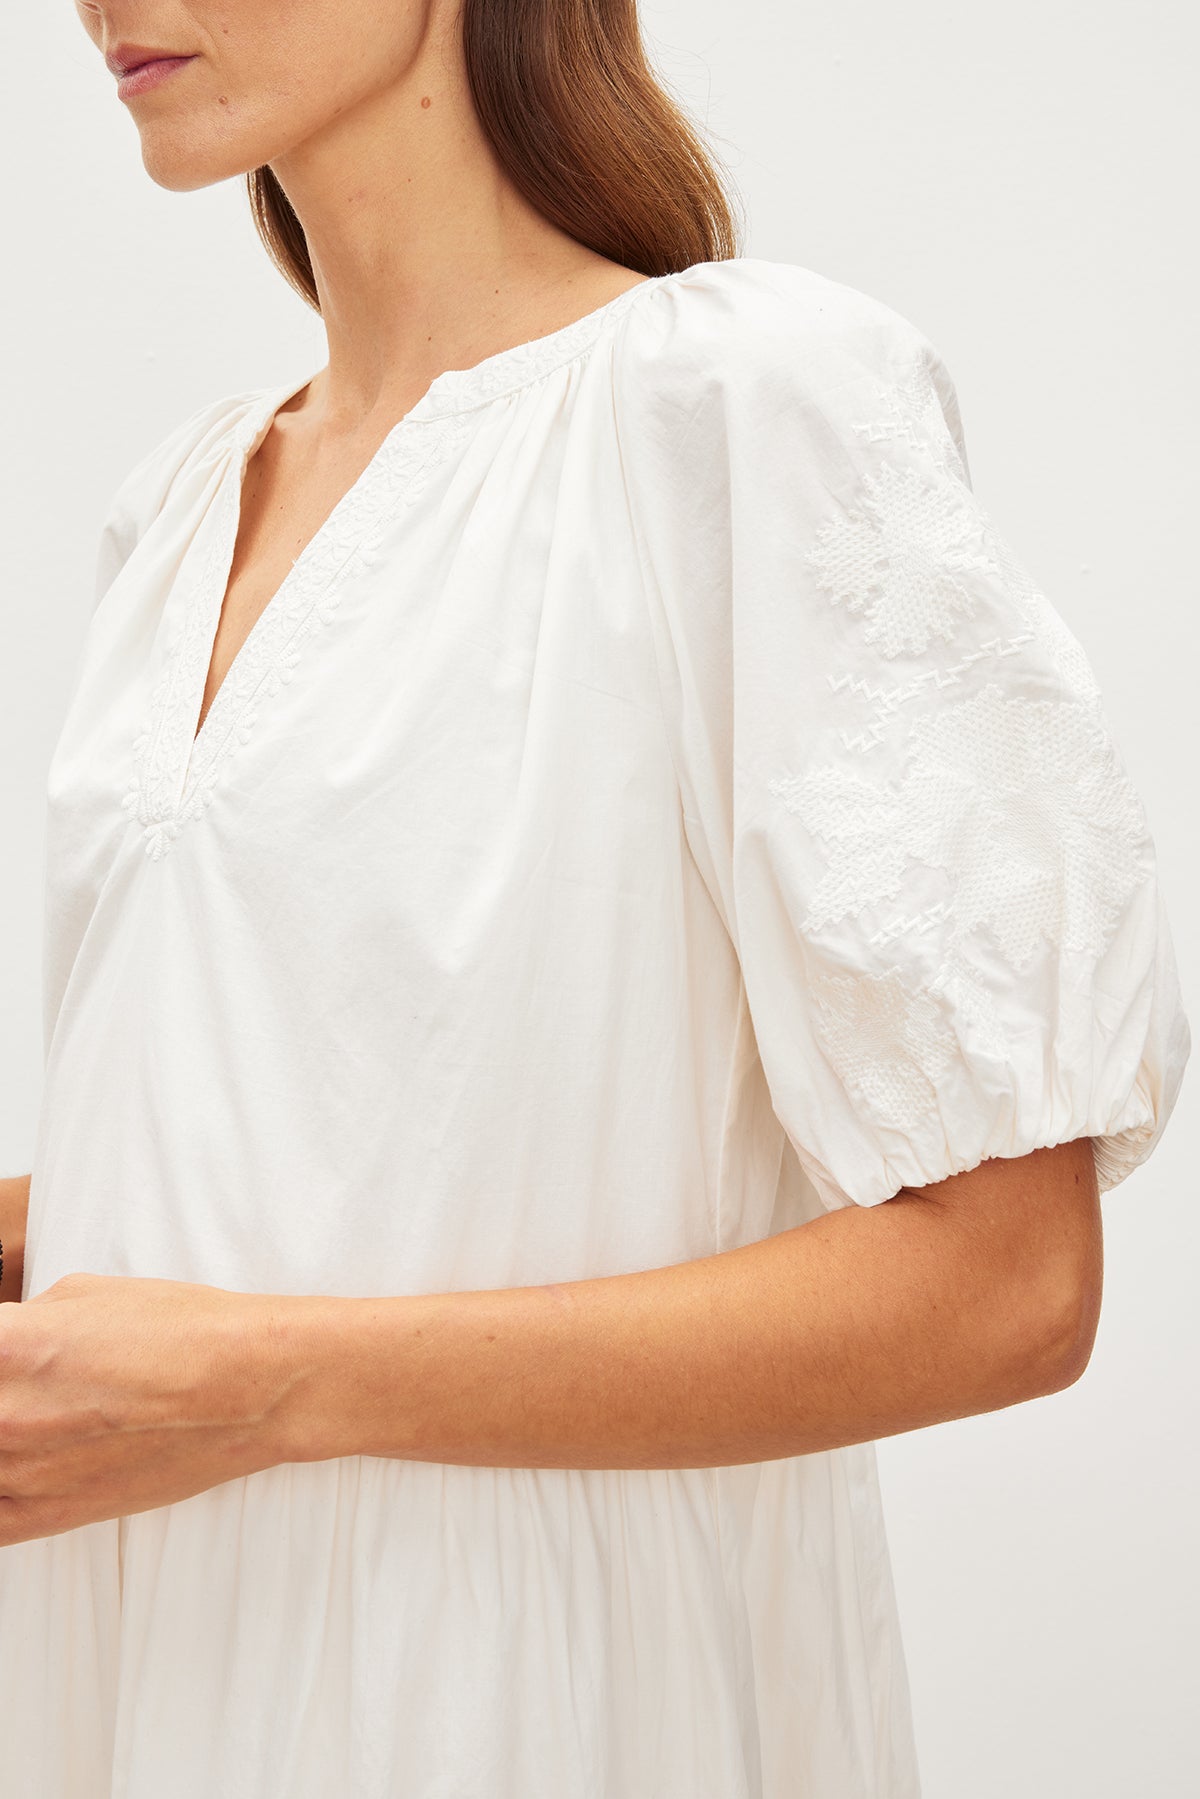   Close-up of a woman in a white cotton dress with floral embroidered puff sleeves, focusing on the shoulder and v-neckline details of the CHRISSY EMBROIDERED BOHO DRESS by Velvet by Graham & Spencer. 